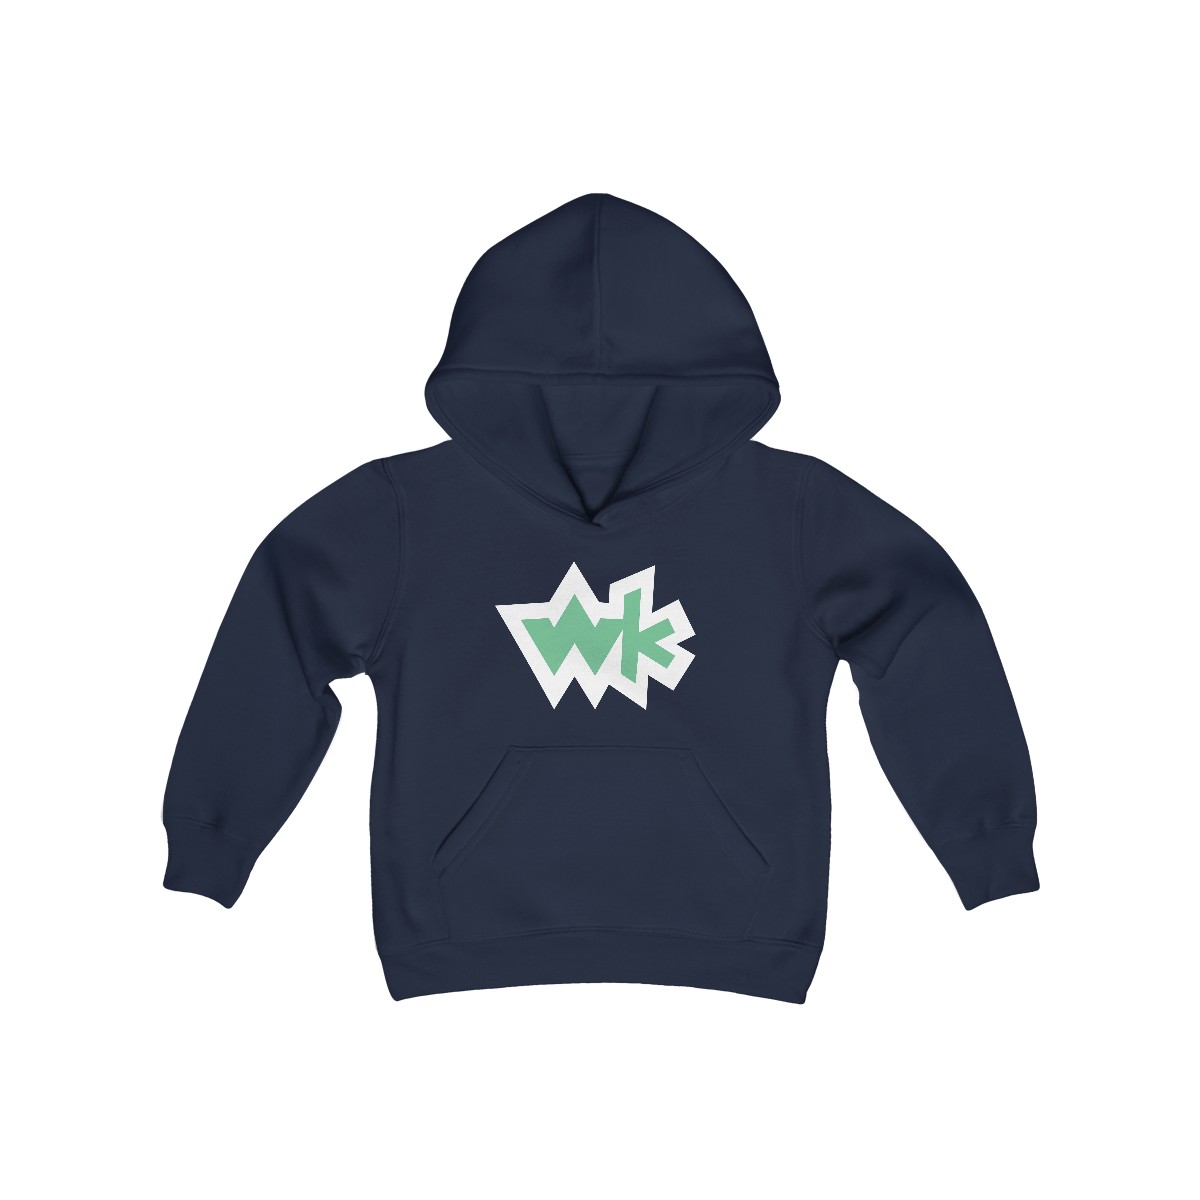 WK Youth Hoodie product thumbnail image